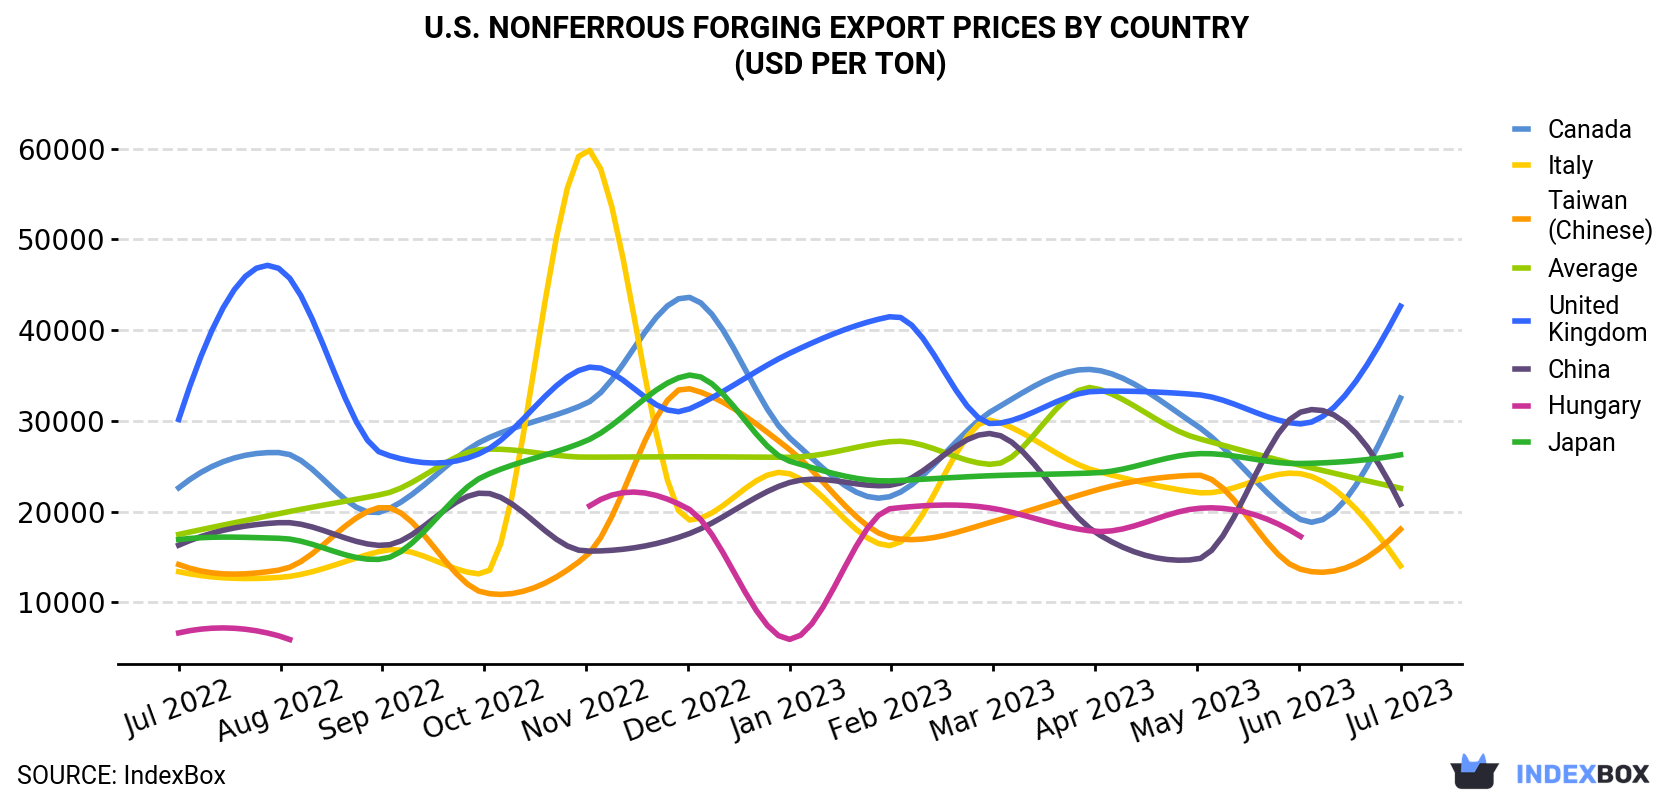 U.S. Nonferrous Forging Export Prices By Country (USD Per Ton)